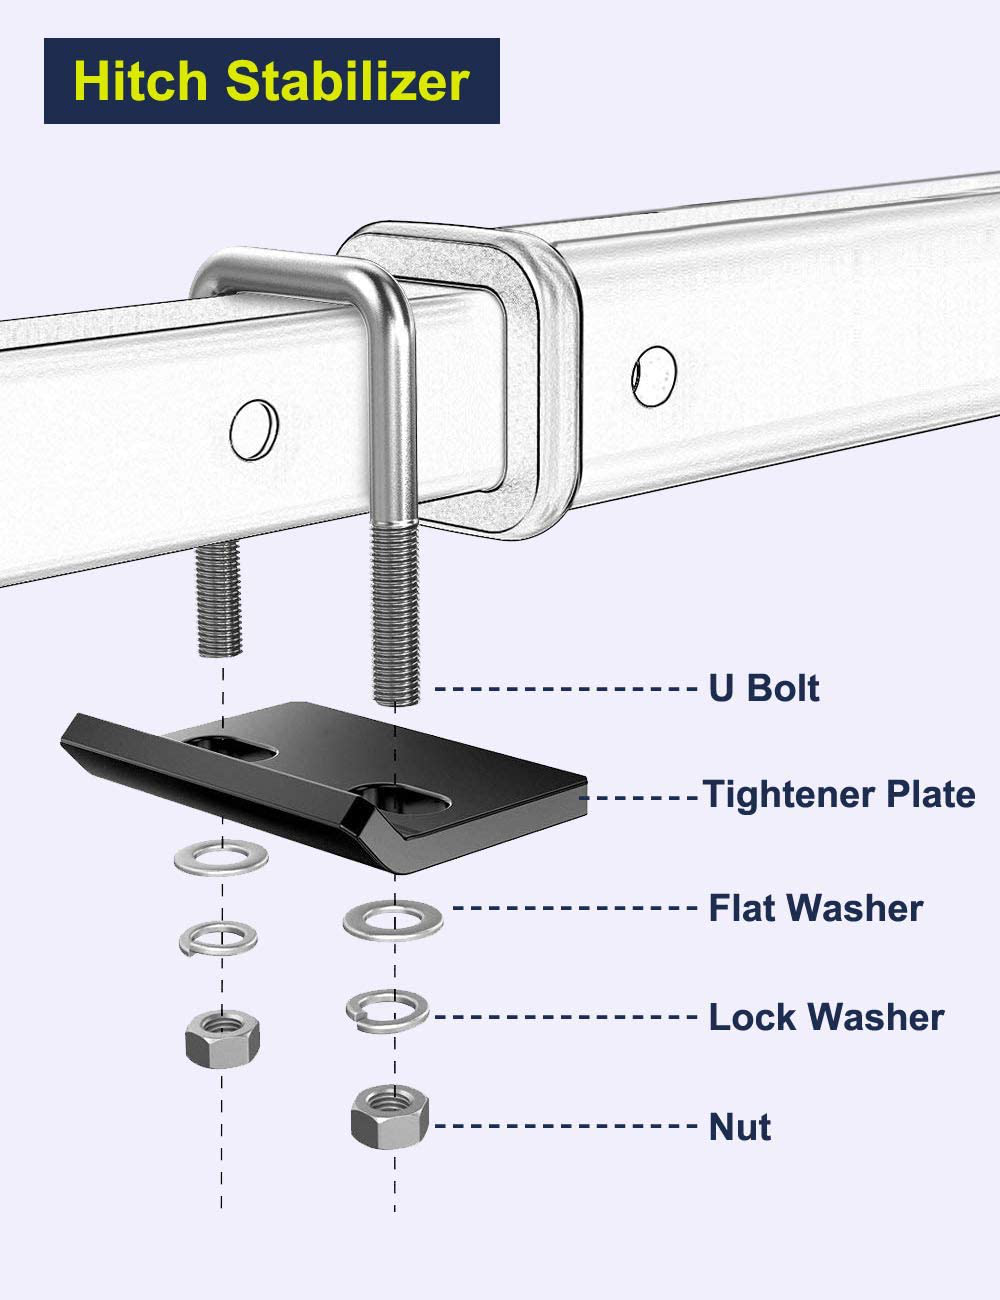 LIBERRWAY Hitch Tightener for 1.25" and 2" Hitches 304 Stainless Steel Hitch Tightener Anti-Rattle Stabilizer Rust-Free Heavy Duty Lock Down Easy Installation Quiet